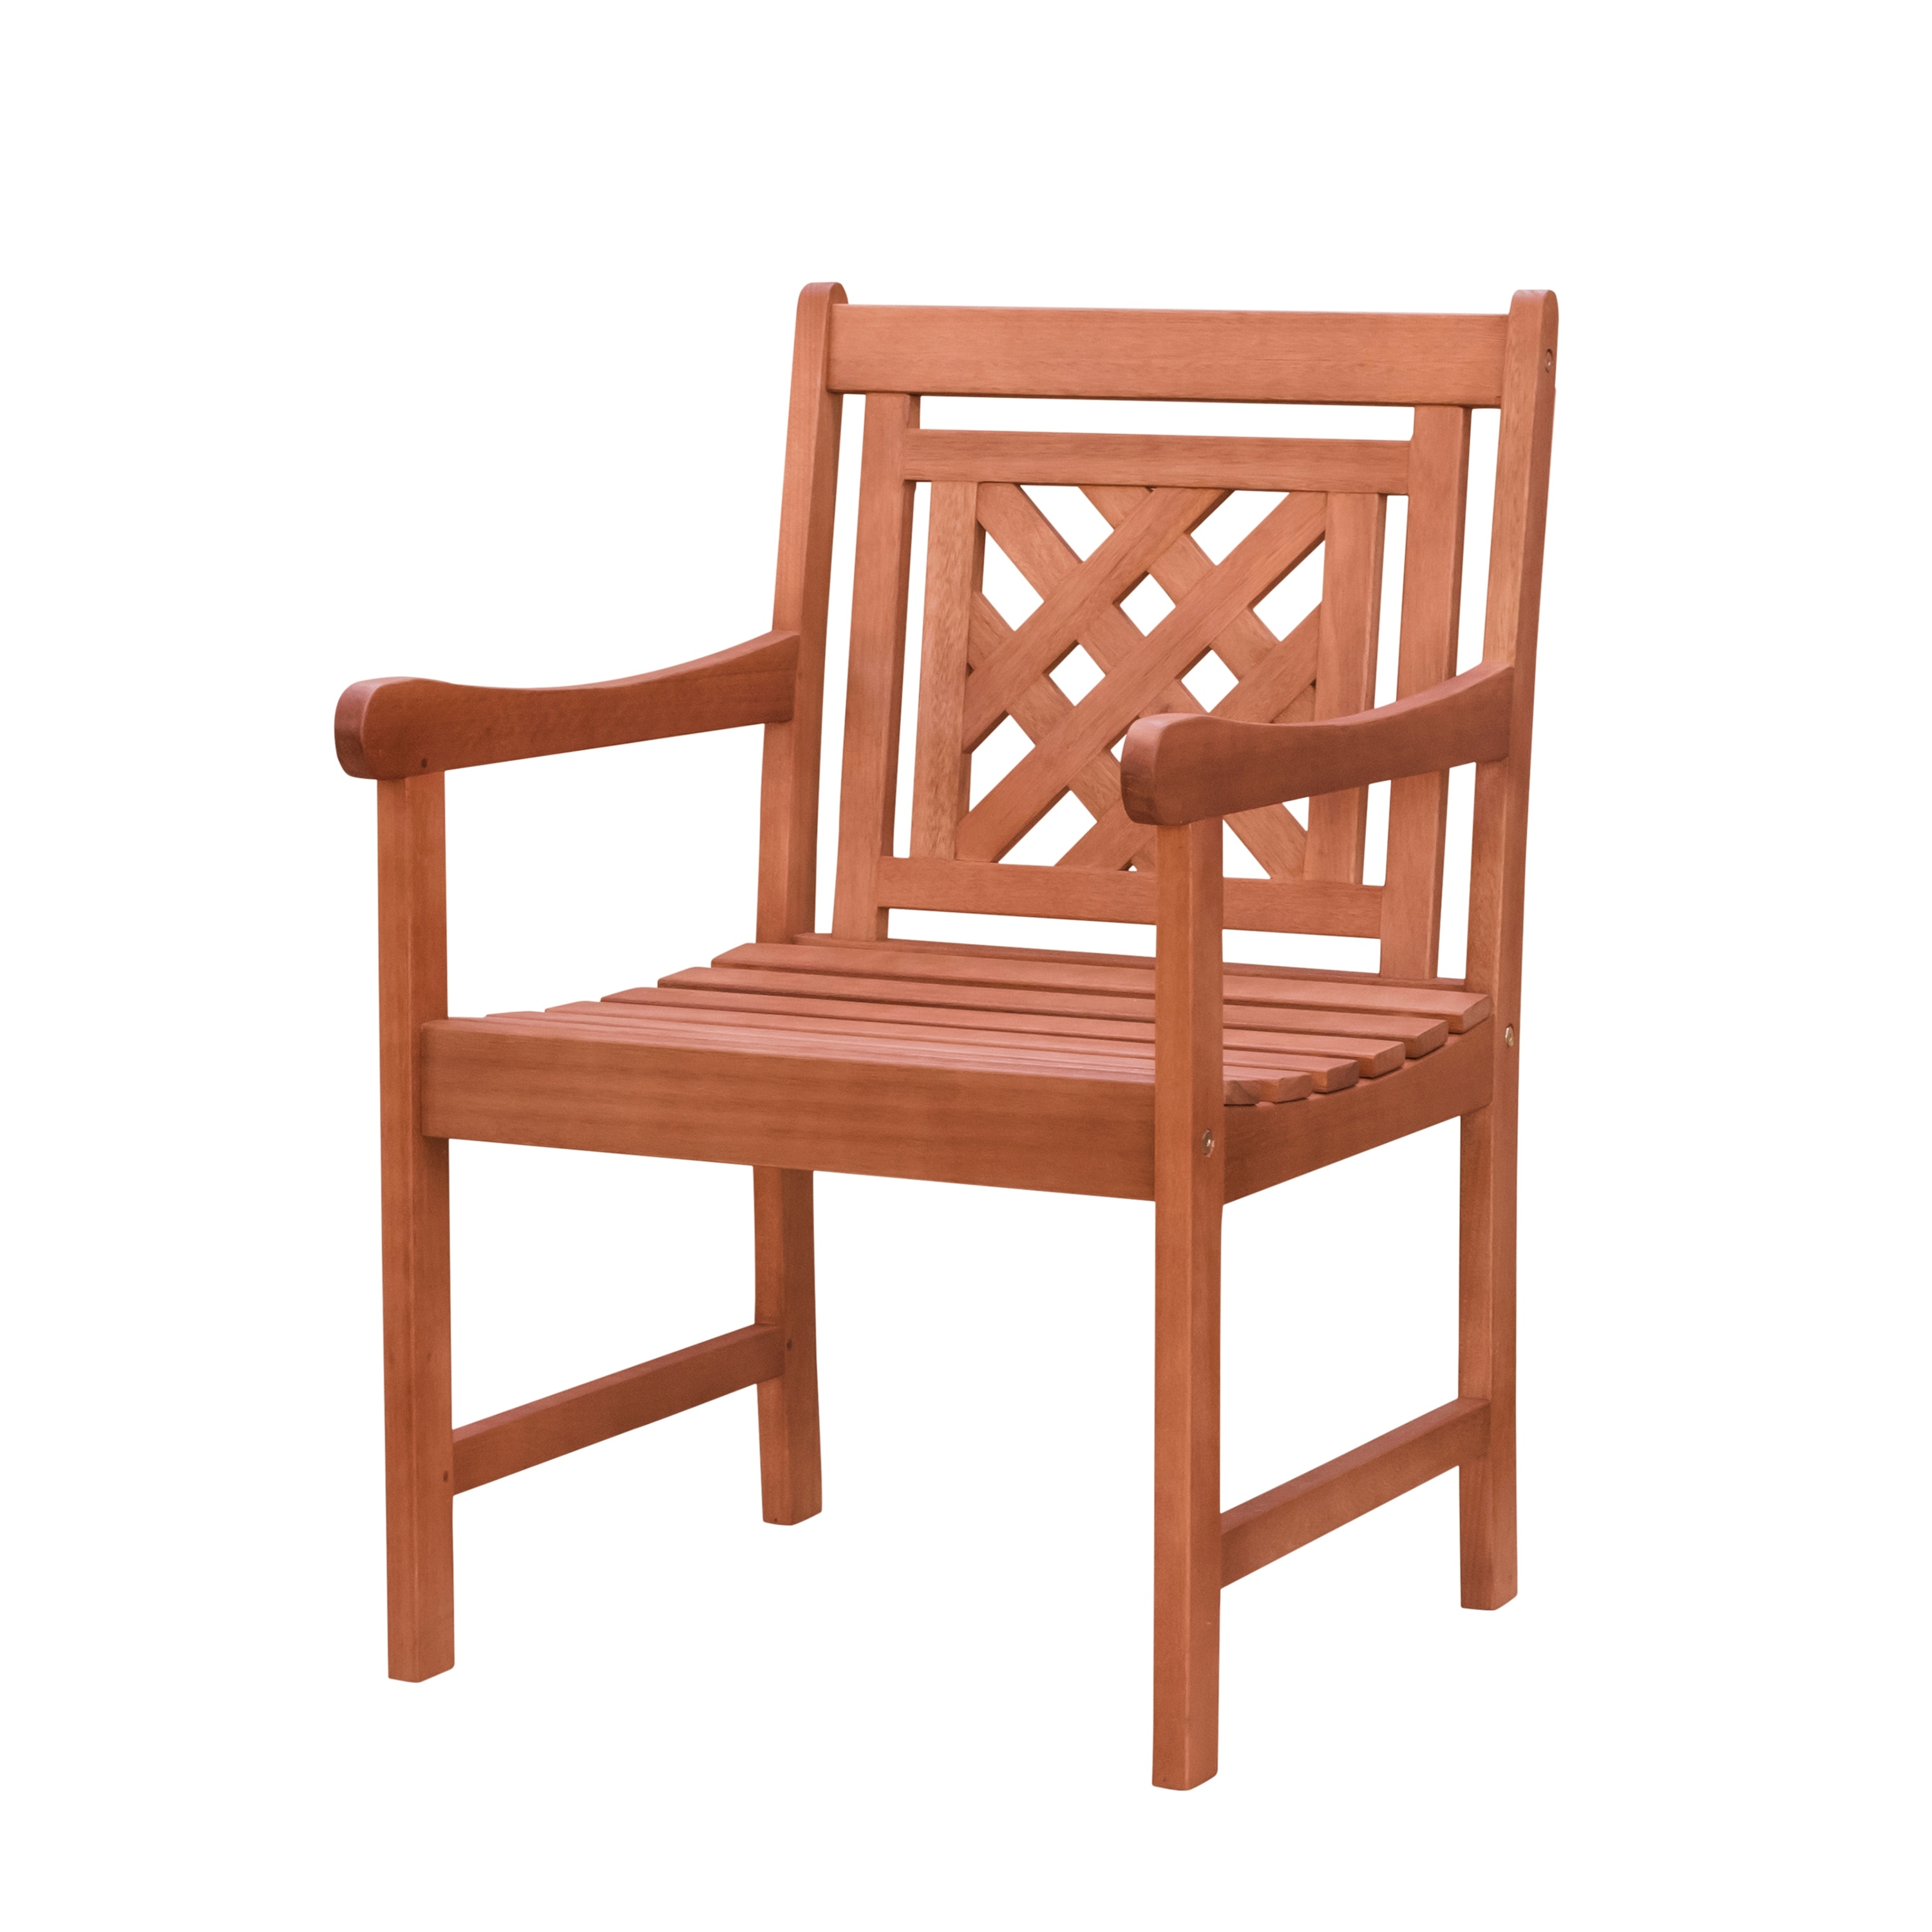 Siriana Reddish Brown Wood Patio Table And Chair Dining Set